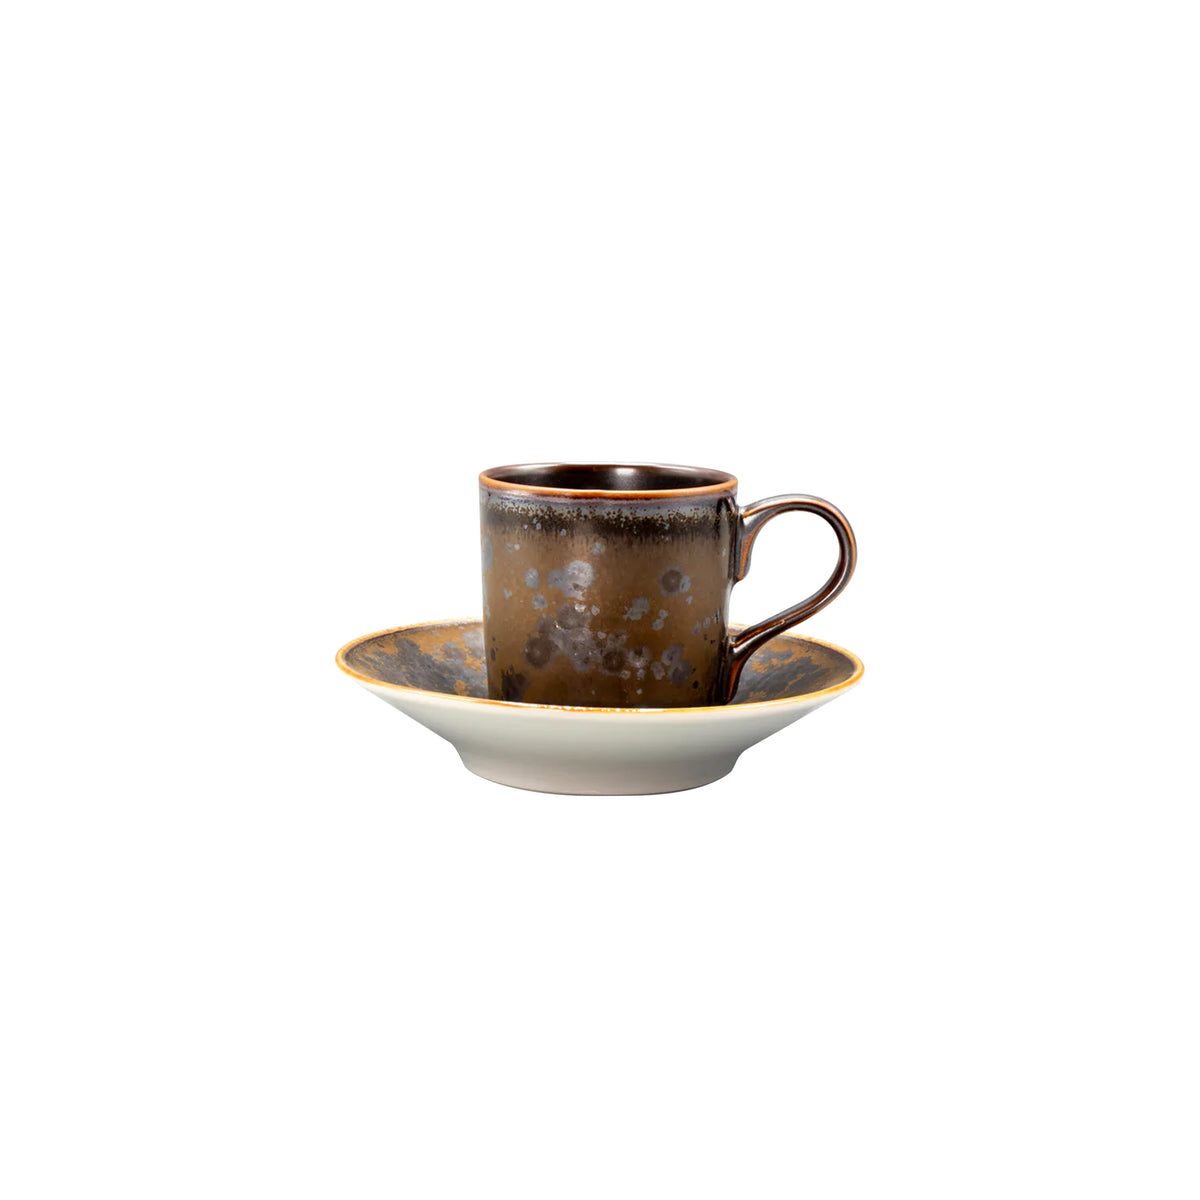 AGUIRRE - Coffee set (cup & saucer)